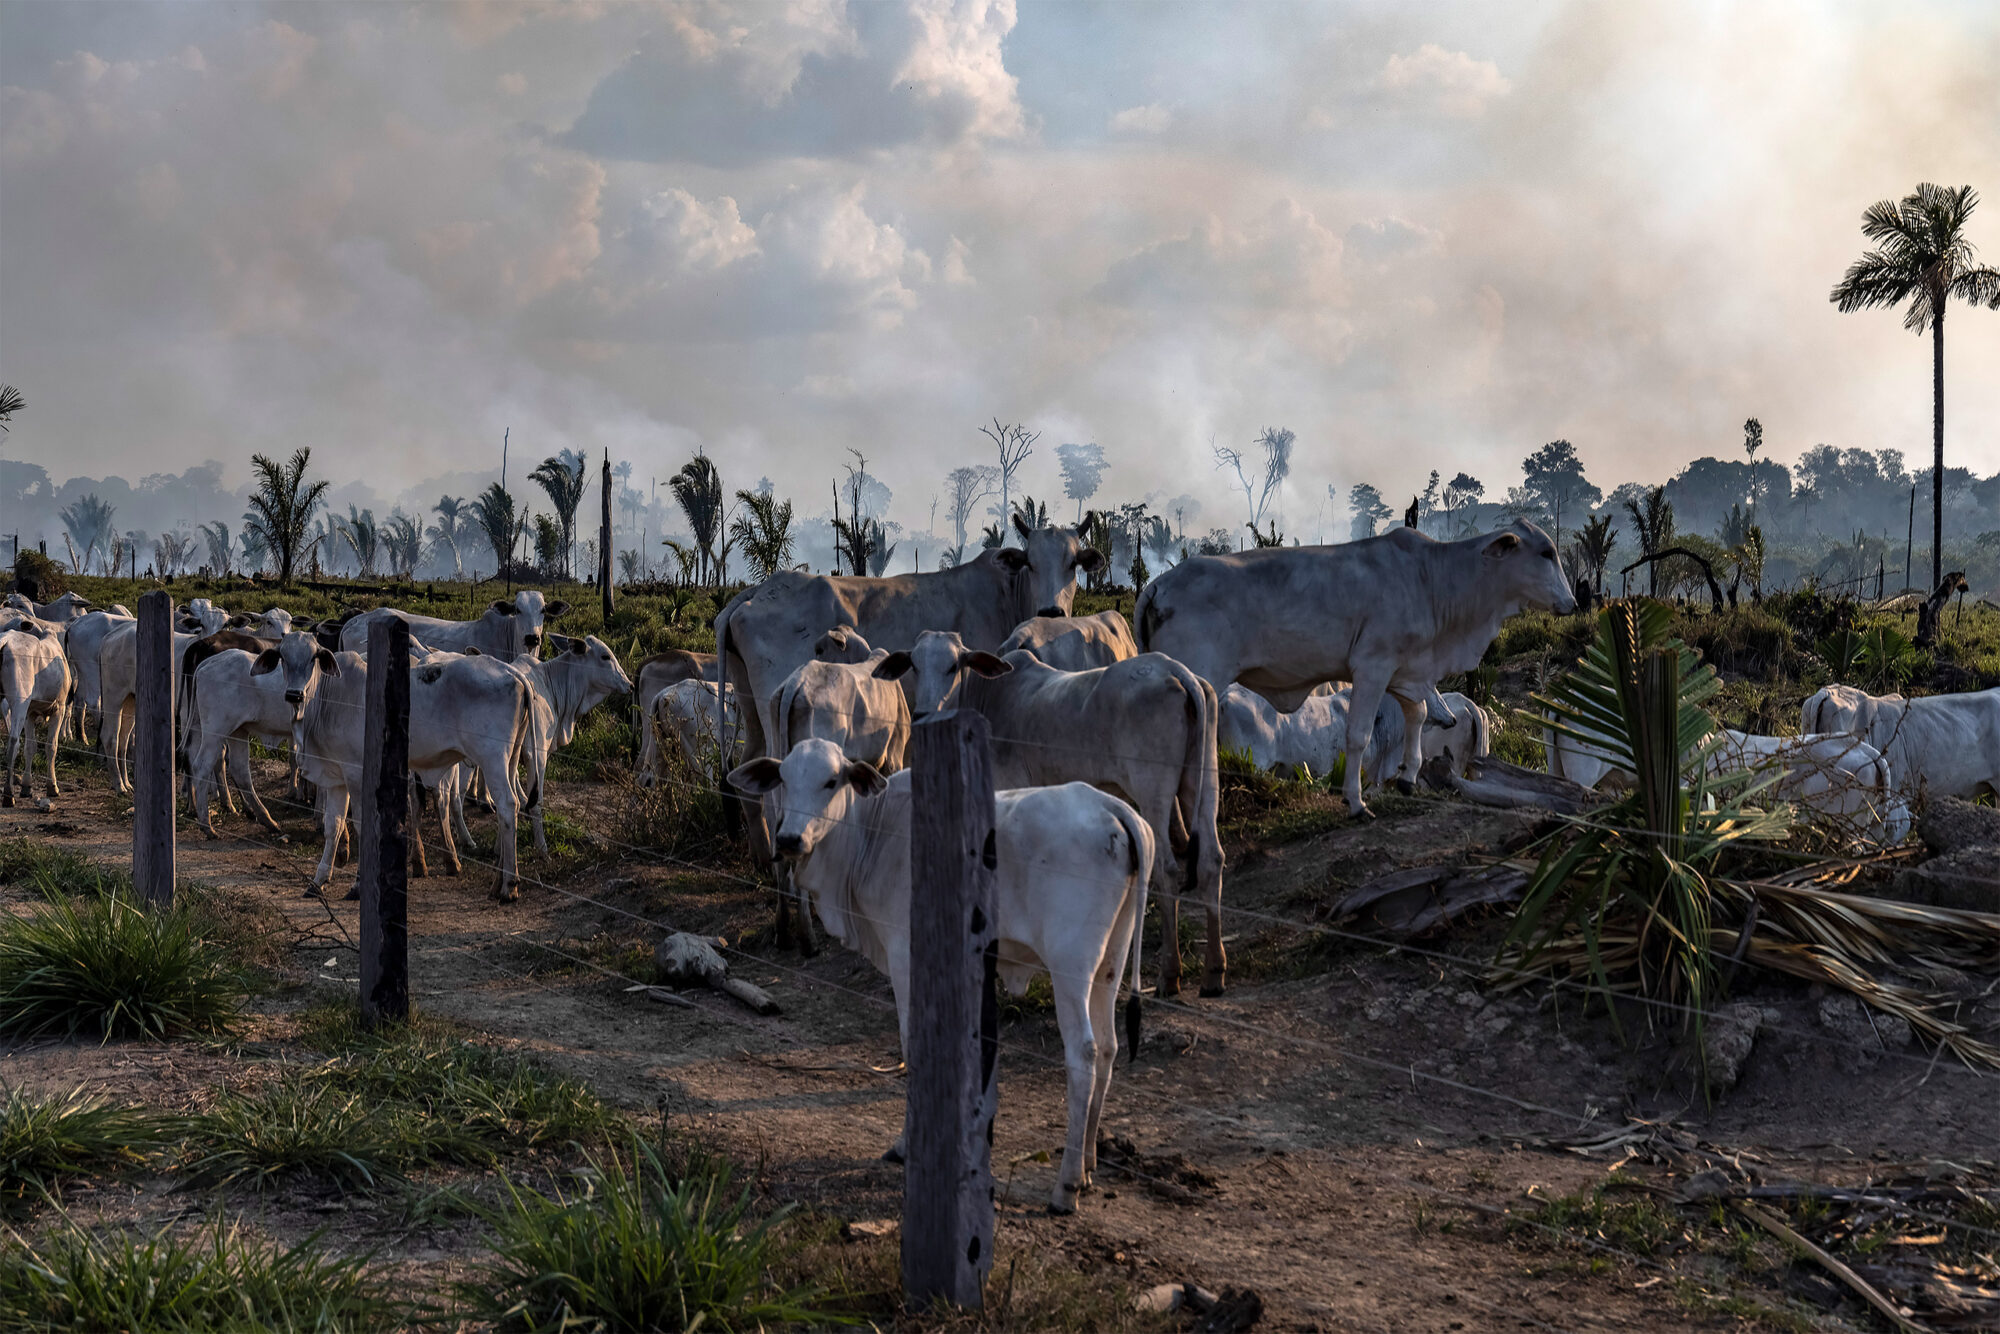 <p>Cattle are raised next to a recently deforested and burnt area in Candeias do Jamari, Rondônia state, Brazil. Cattle ranching accounts for 80% of the deforestation in the Brazilian Amazon (Image © Victor Moriyama / Amazônia em Chamas)</p>